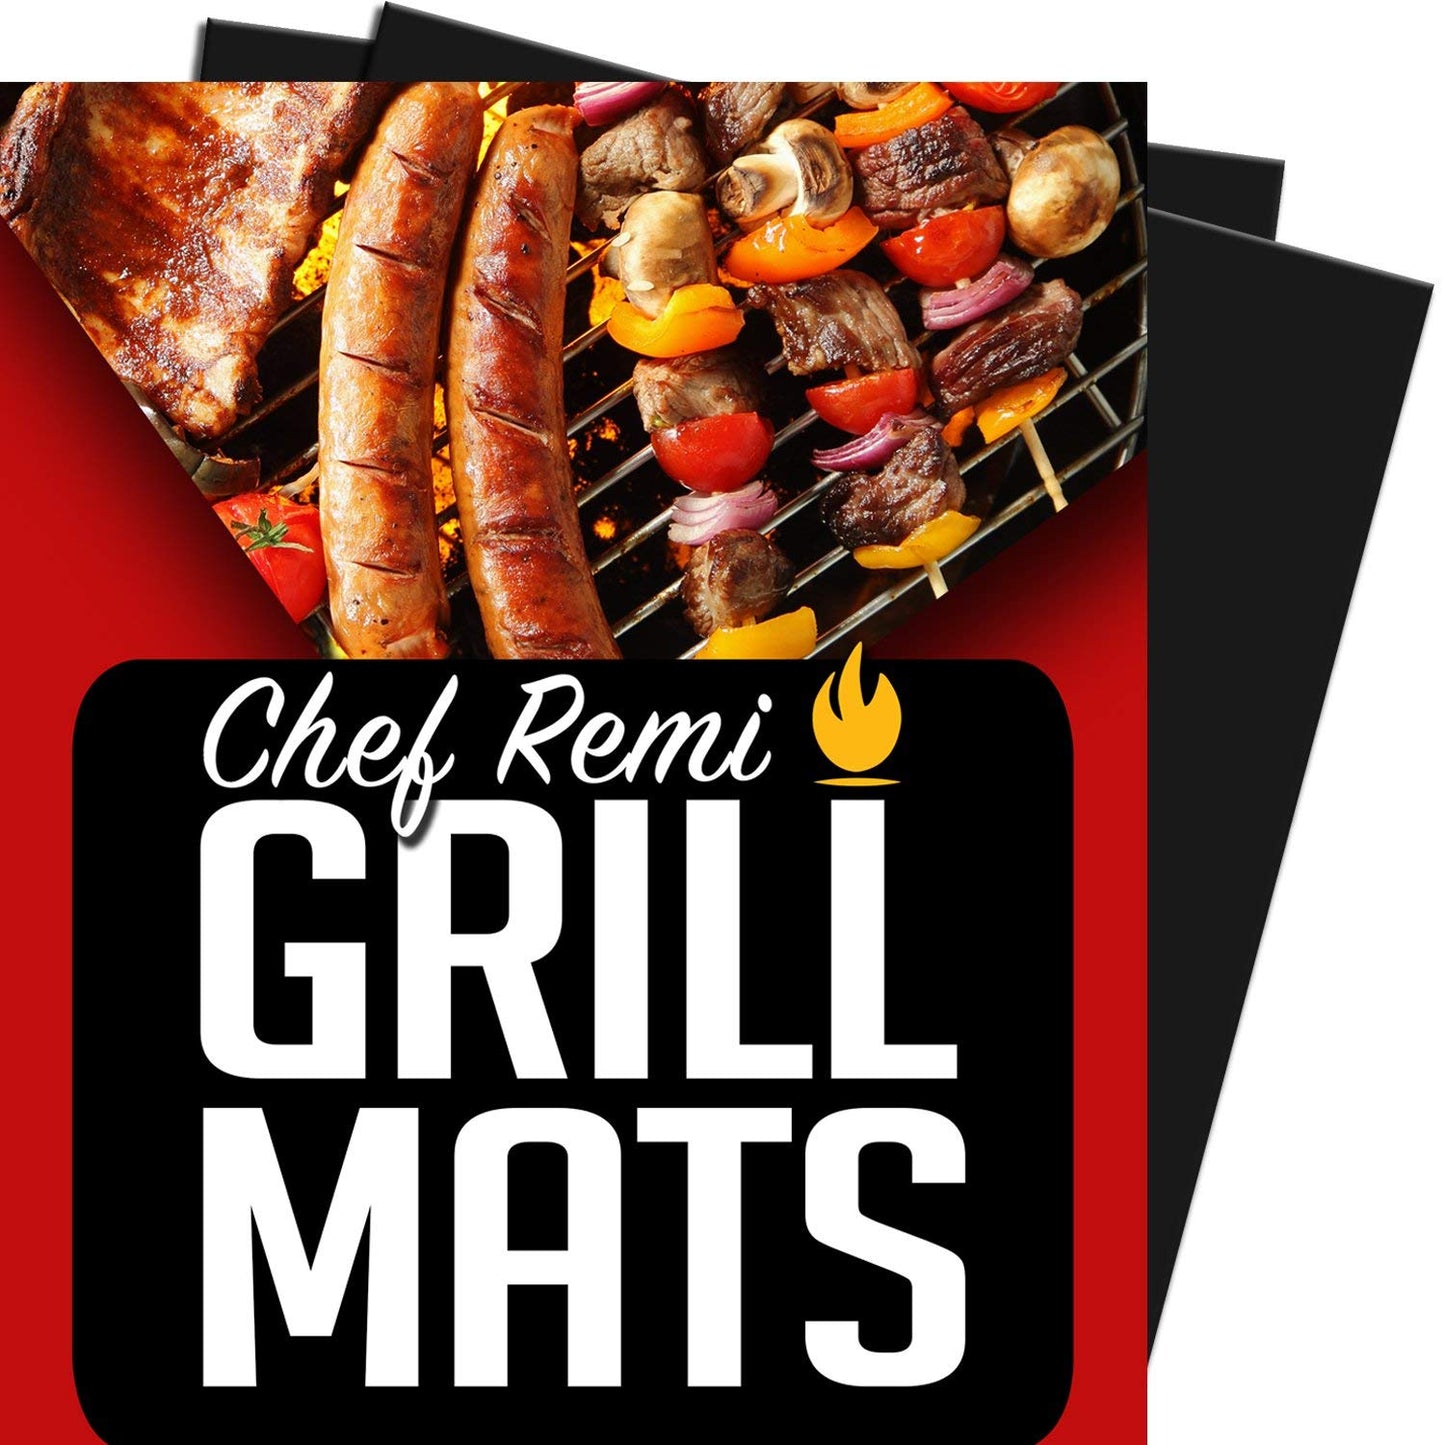 BBQ Grill Mats Non Stick Reusable Mats for Gas, Charcoal, Electric BBQs and Ovens Dishwasher Safe